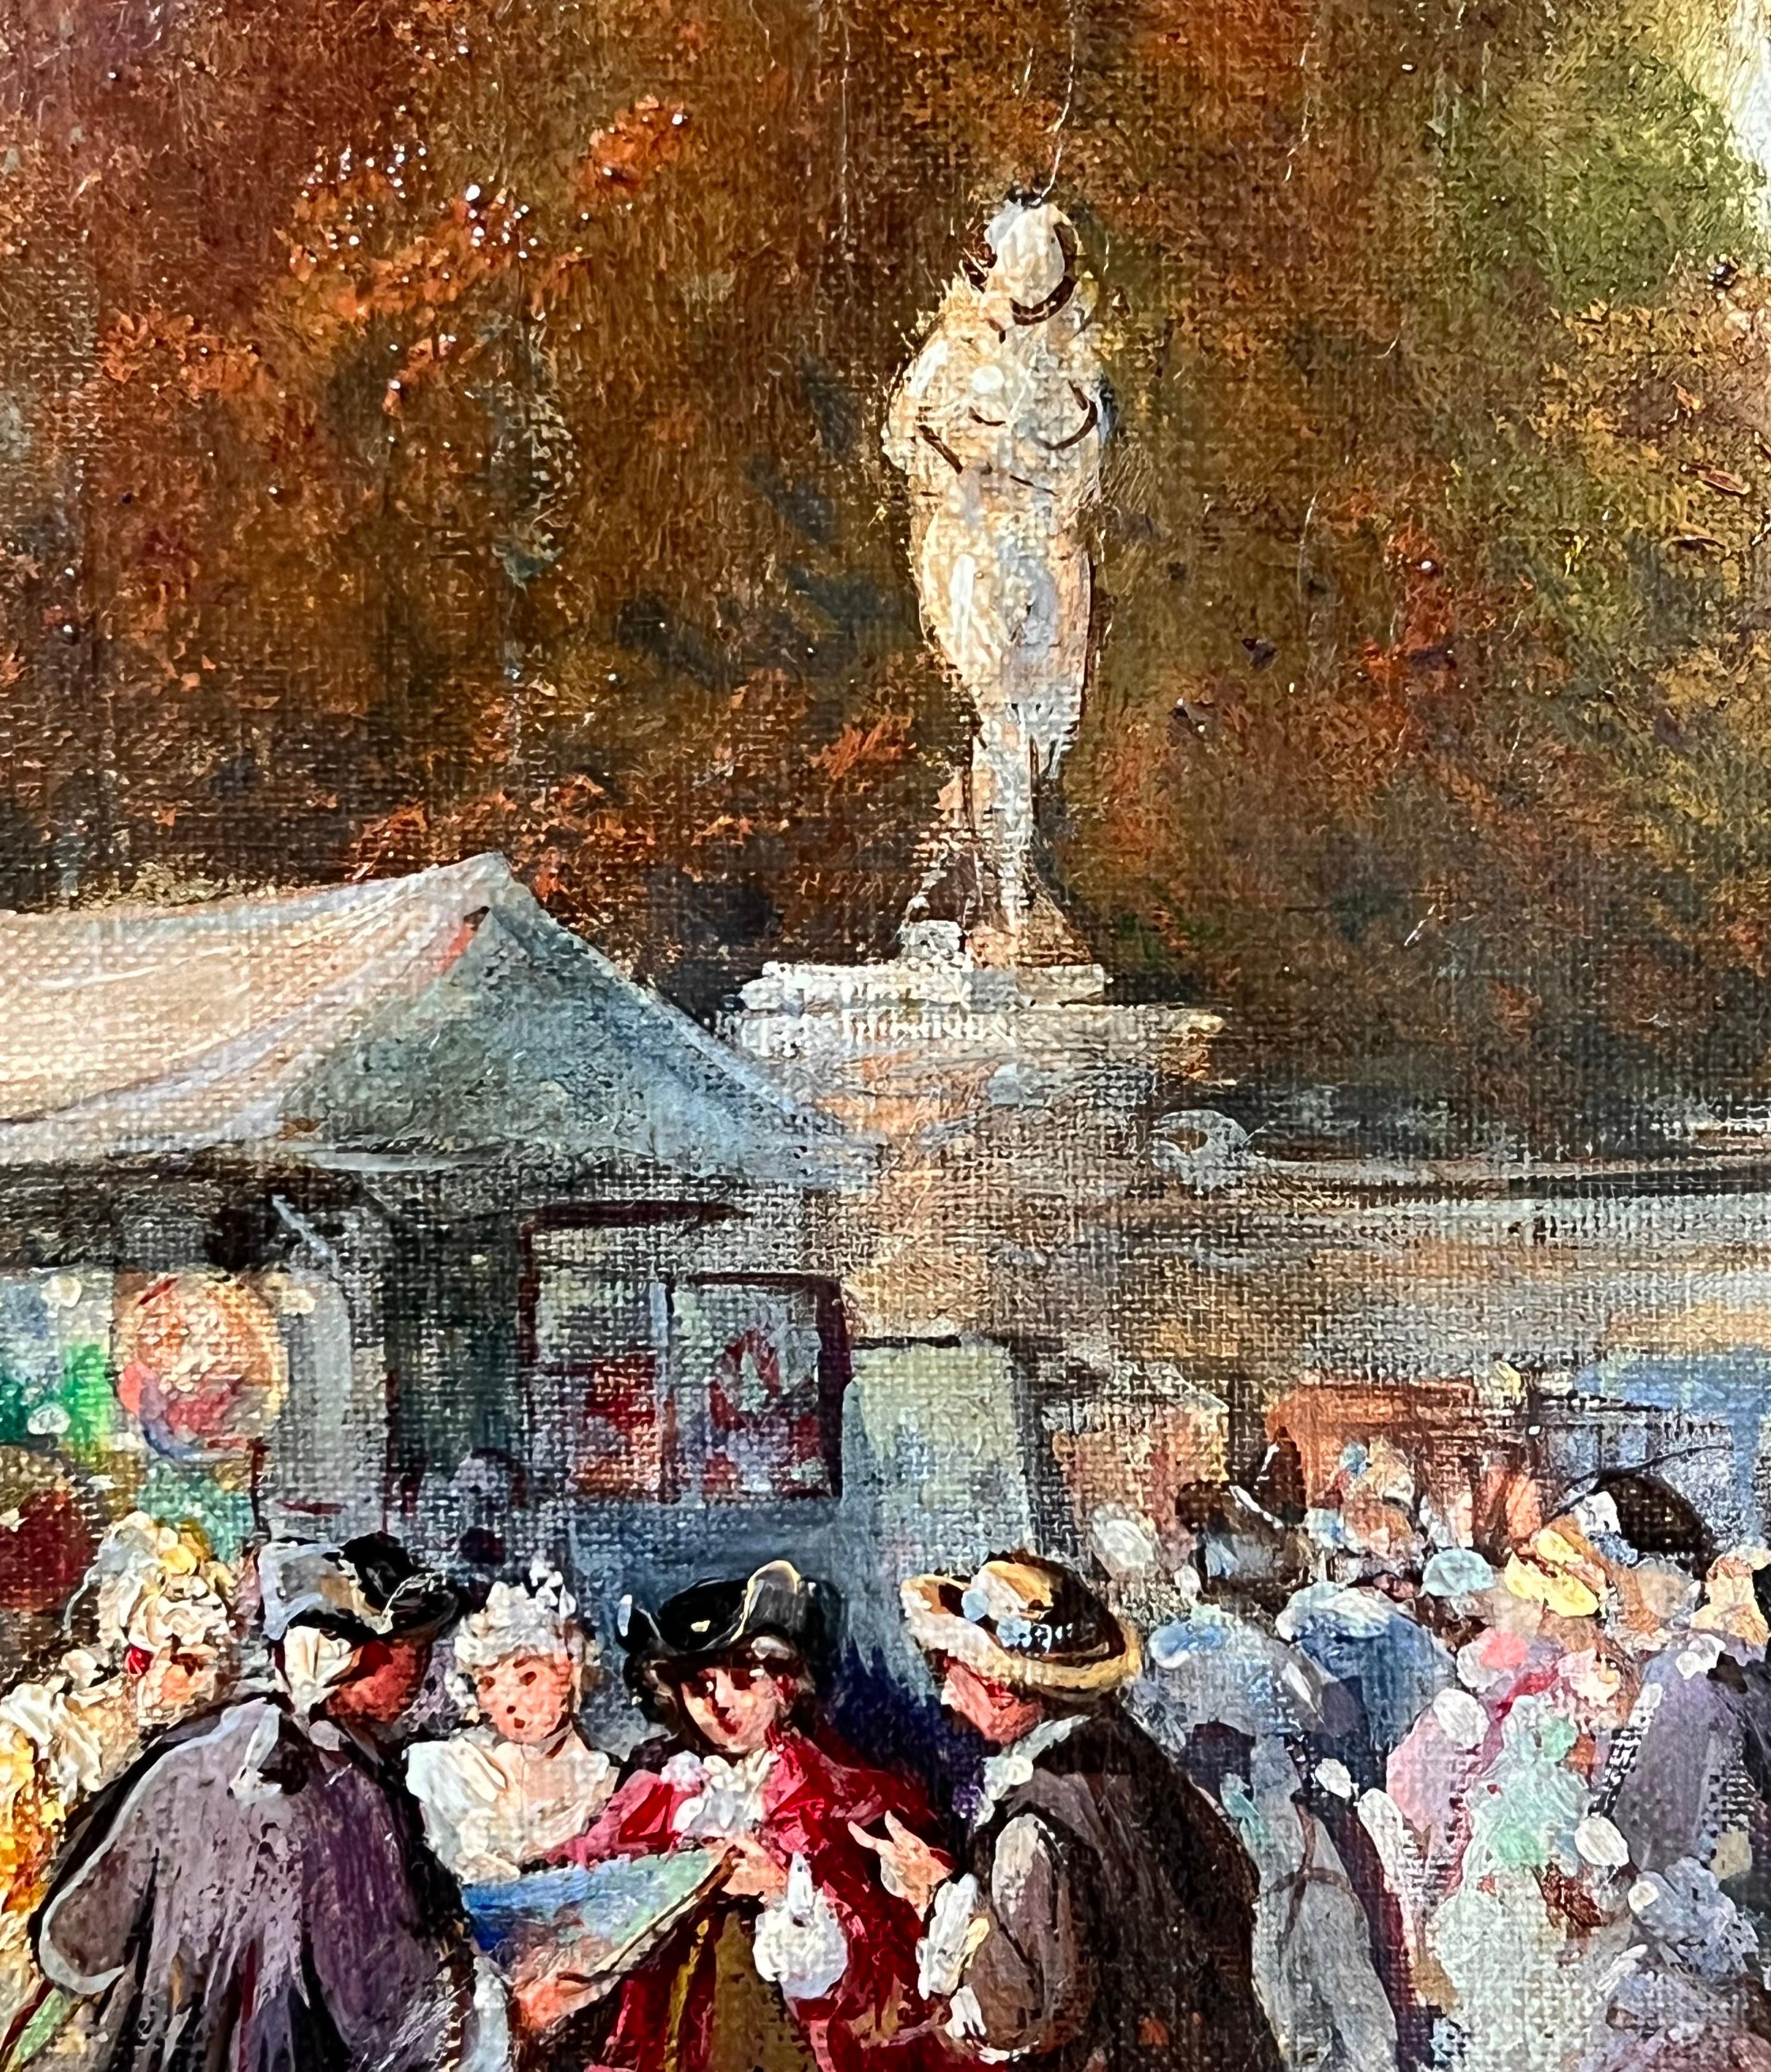 19th century French romantic painting - The art fair in a park landscape 3